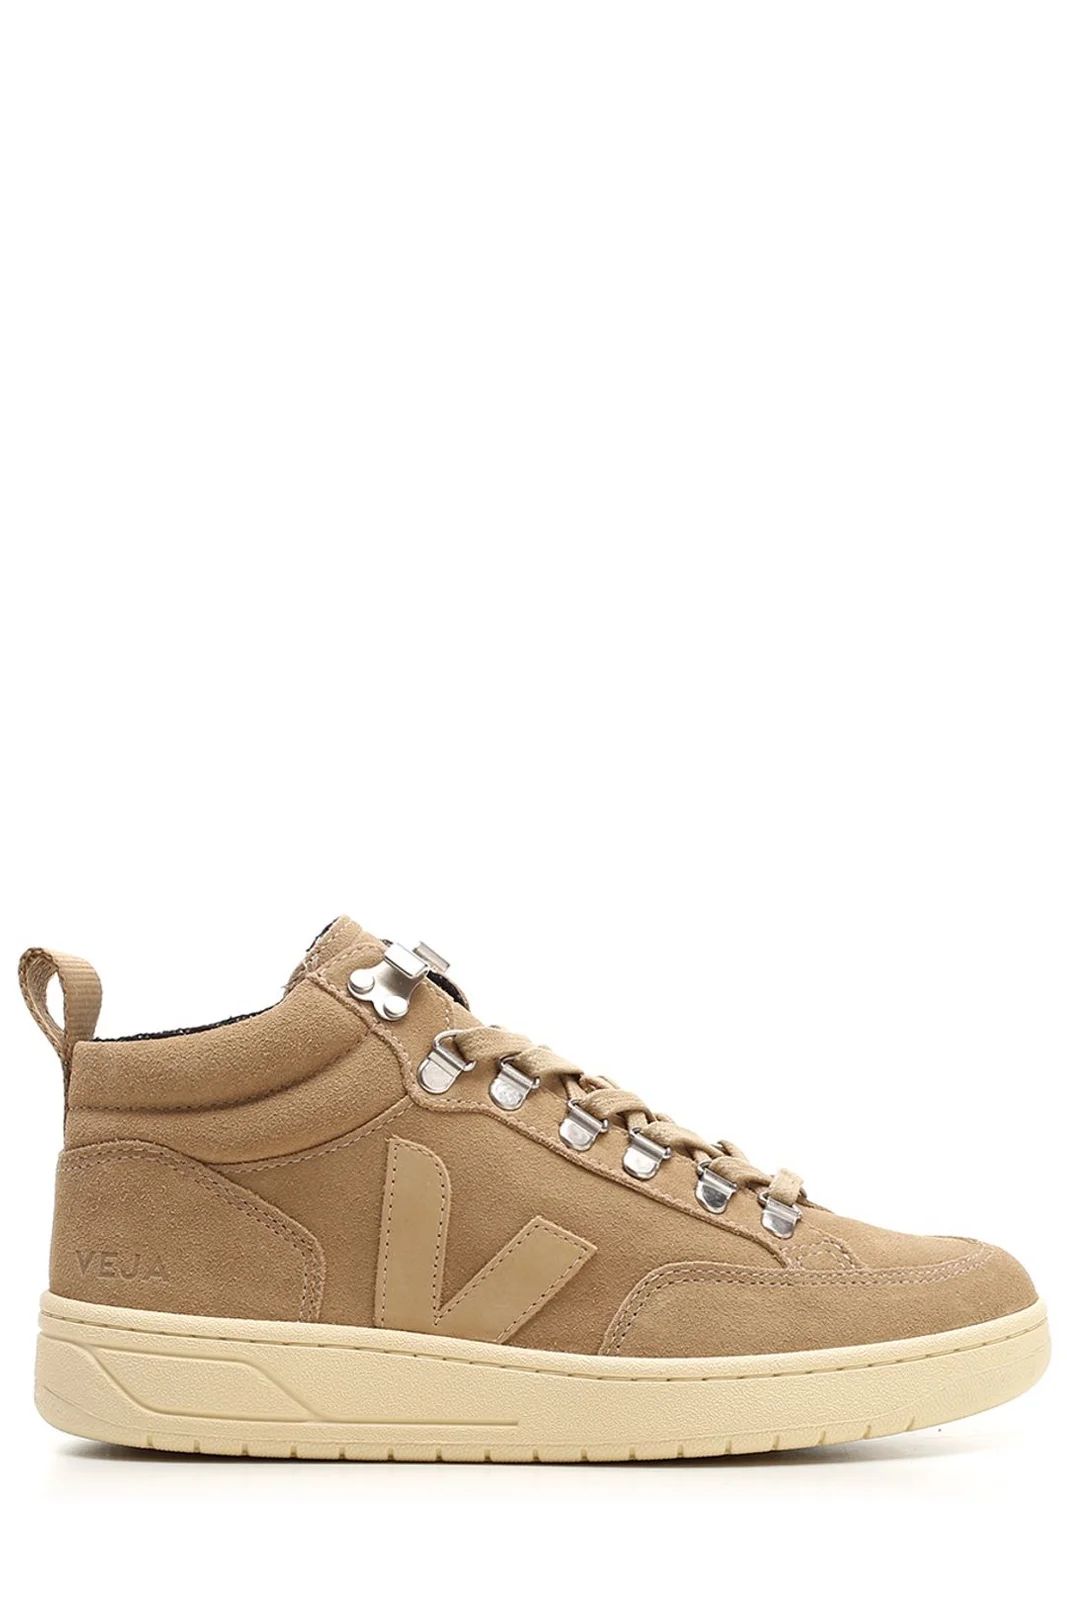 Veja Roraima High-Top Lace-Up Sneakers | Cettire Global